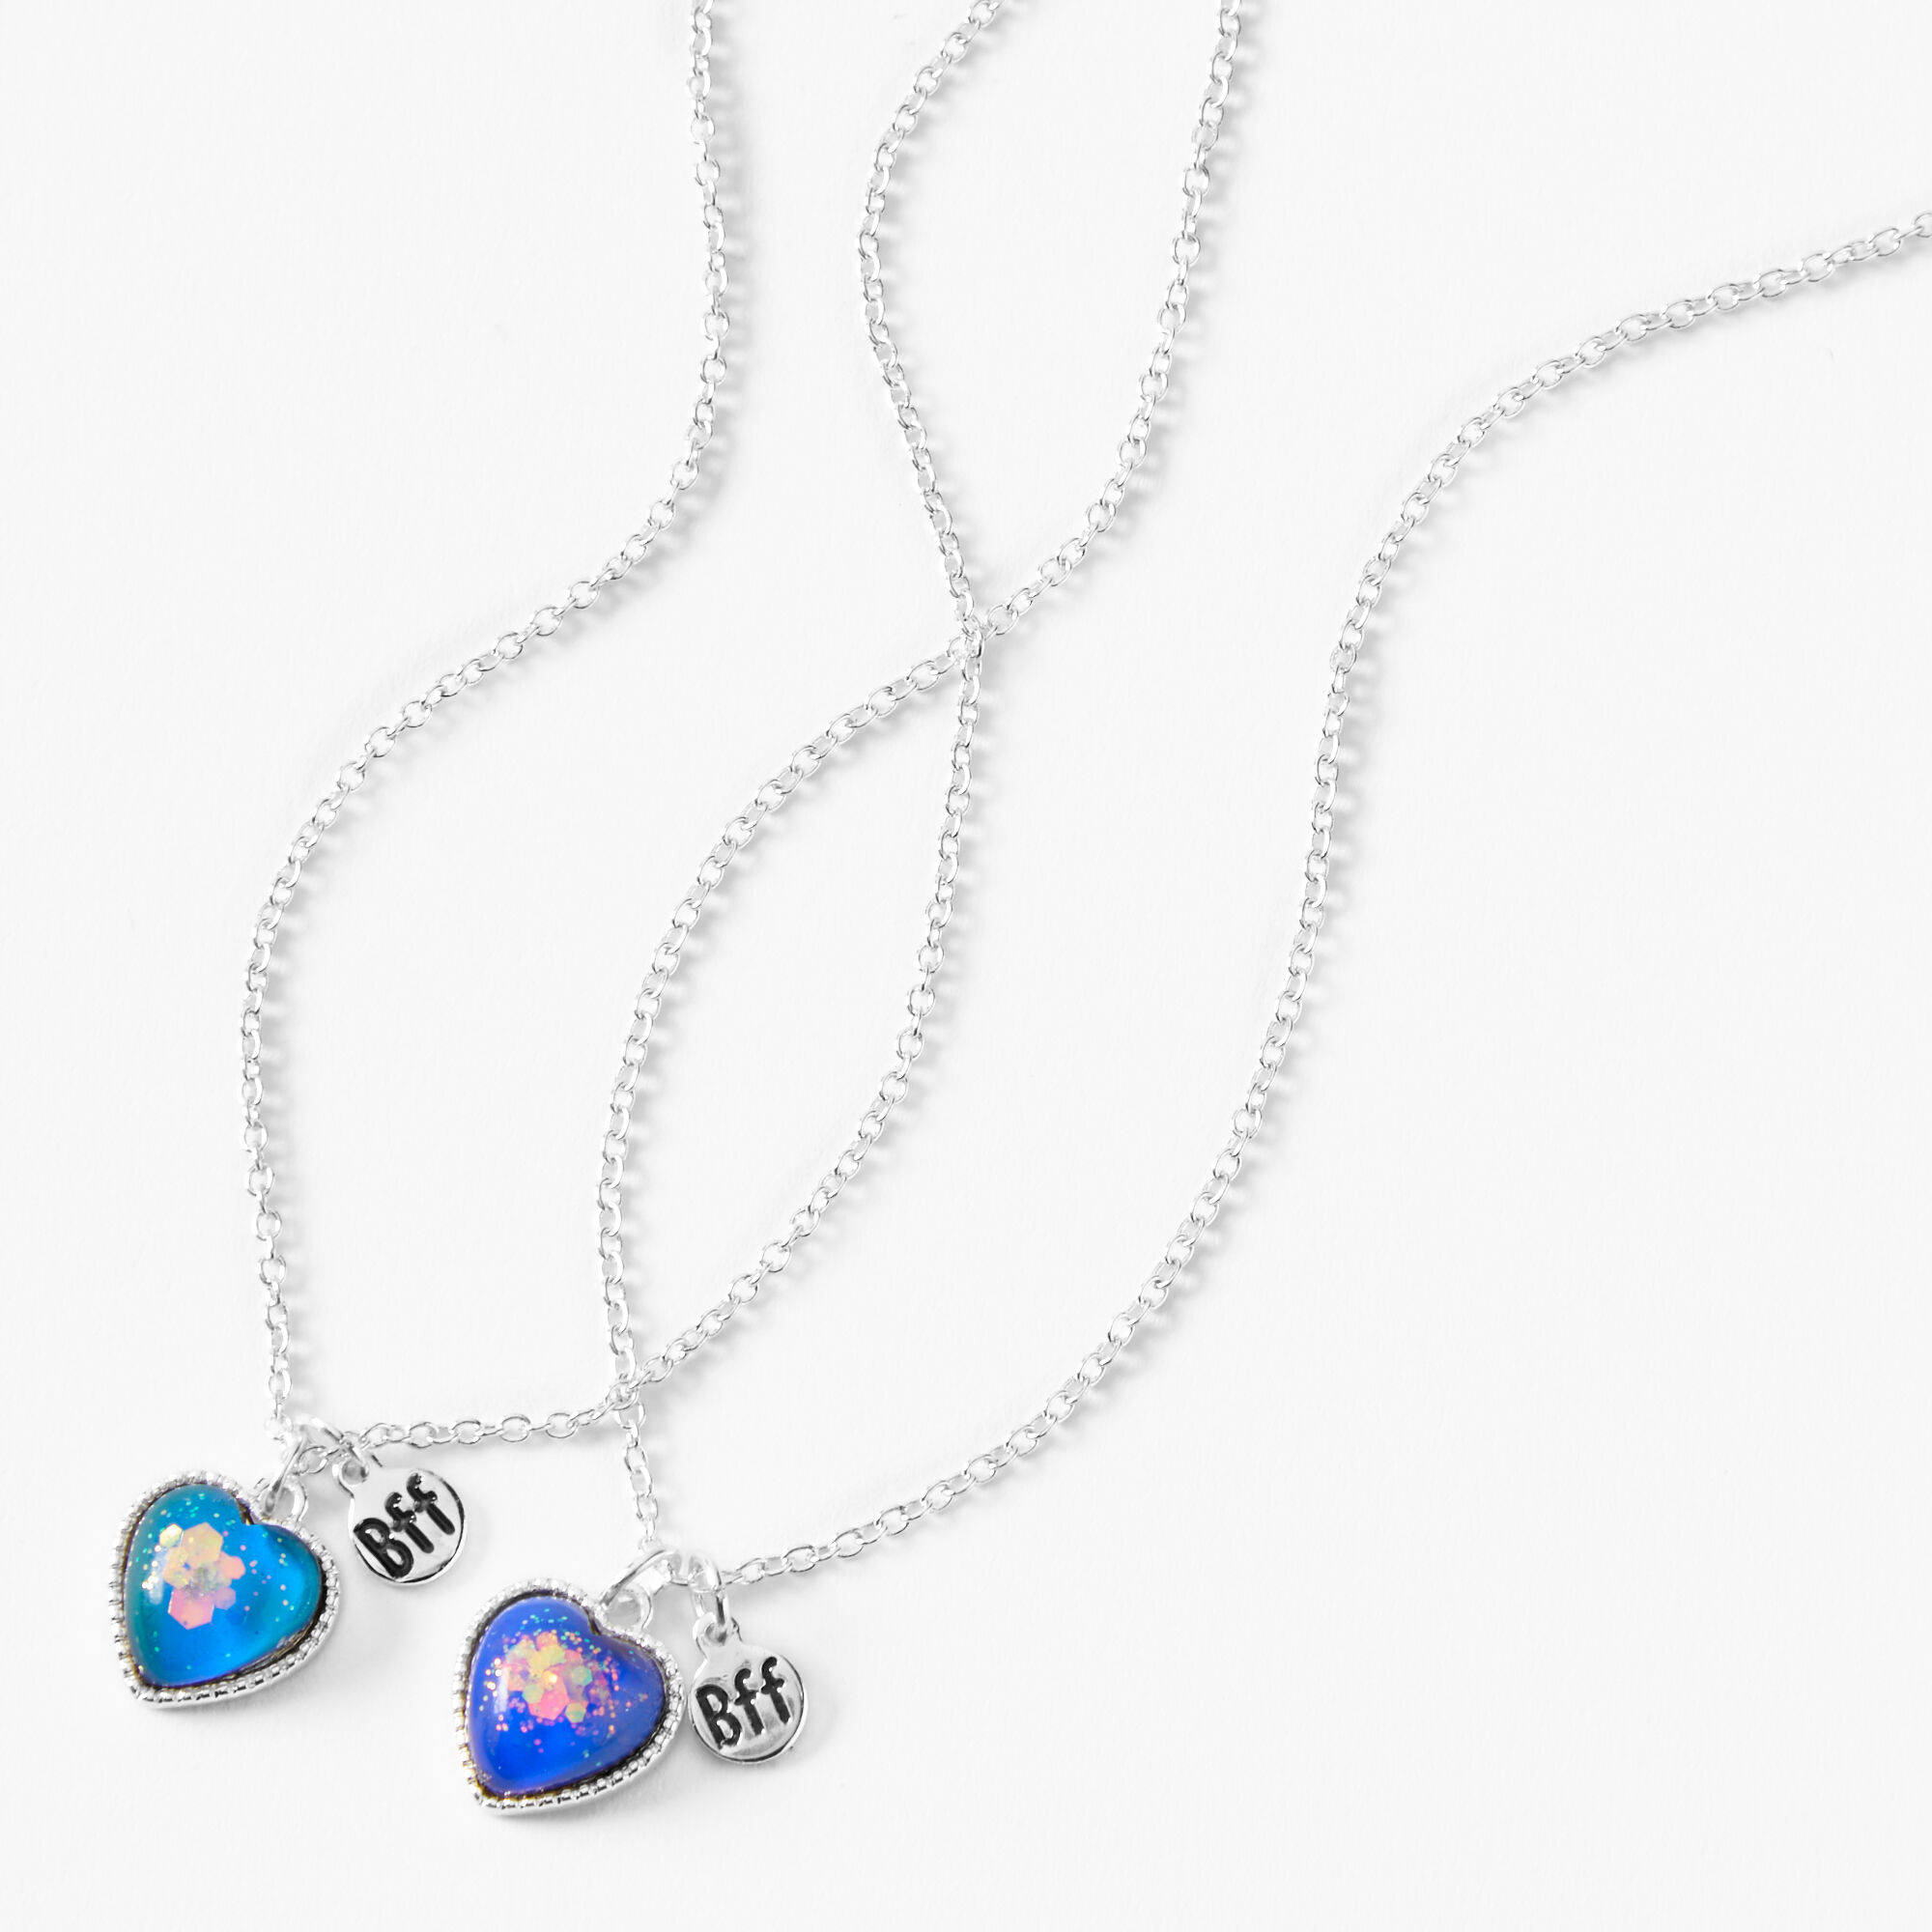 Will And Sandy Mood Changing Best Friend Pendant With Temperature Sensing  For Women And Children Fashionable Broken Heart Design From Shanshan123456,  $2.75 | DHgate.Com